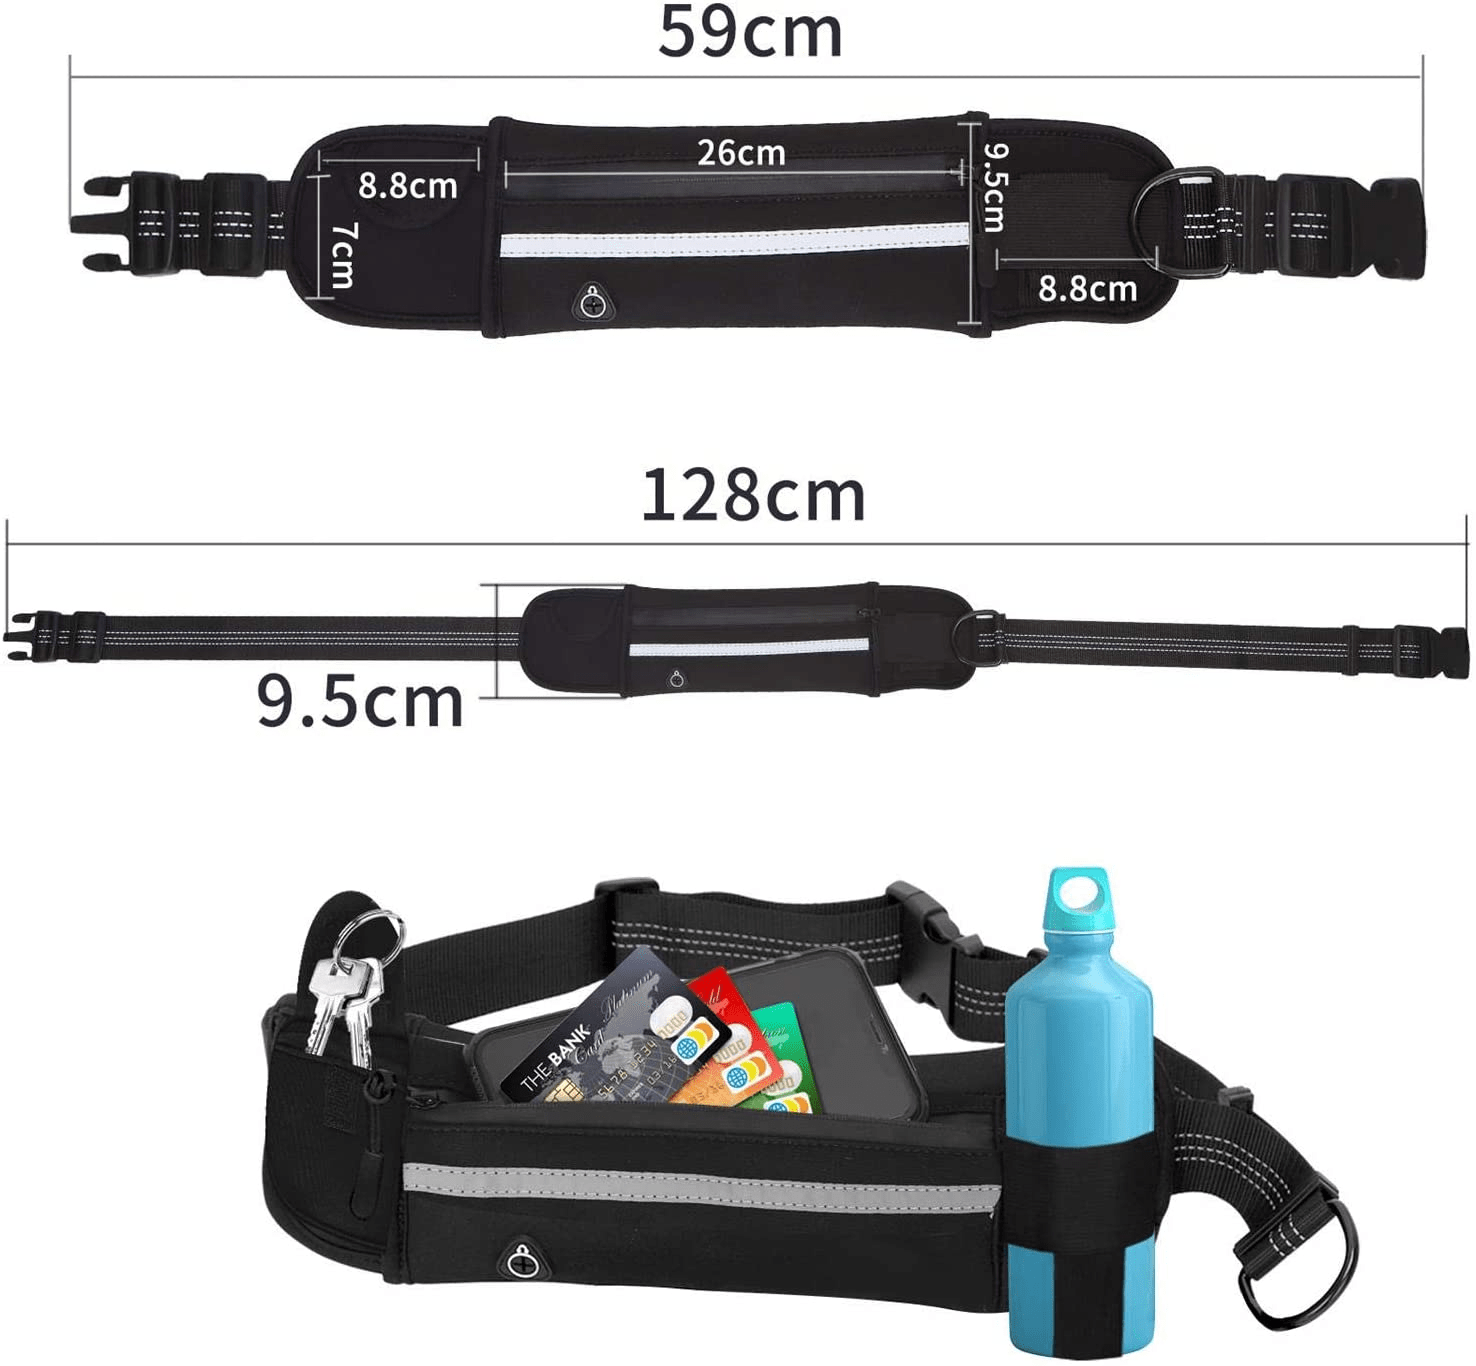 Hands free dog walking leash with running waist pack